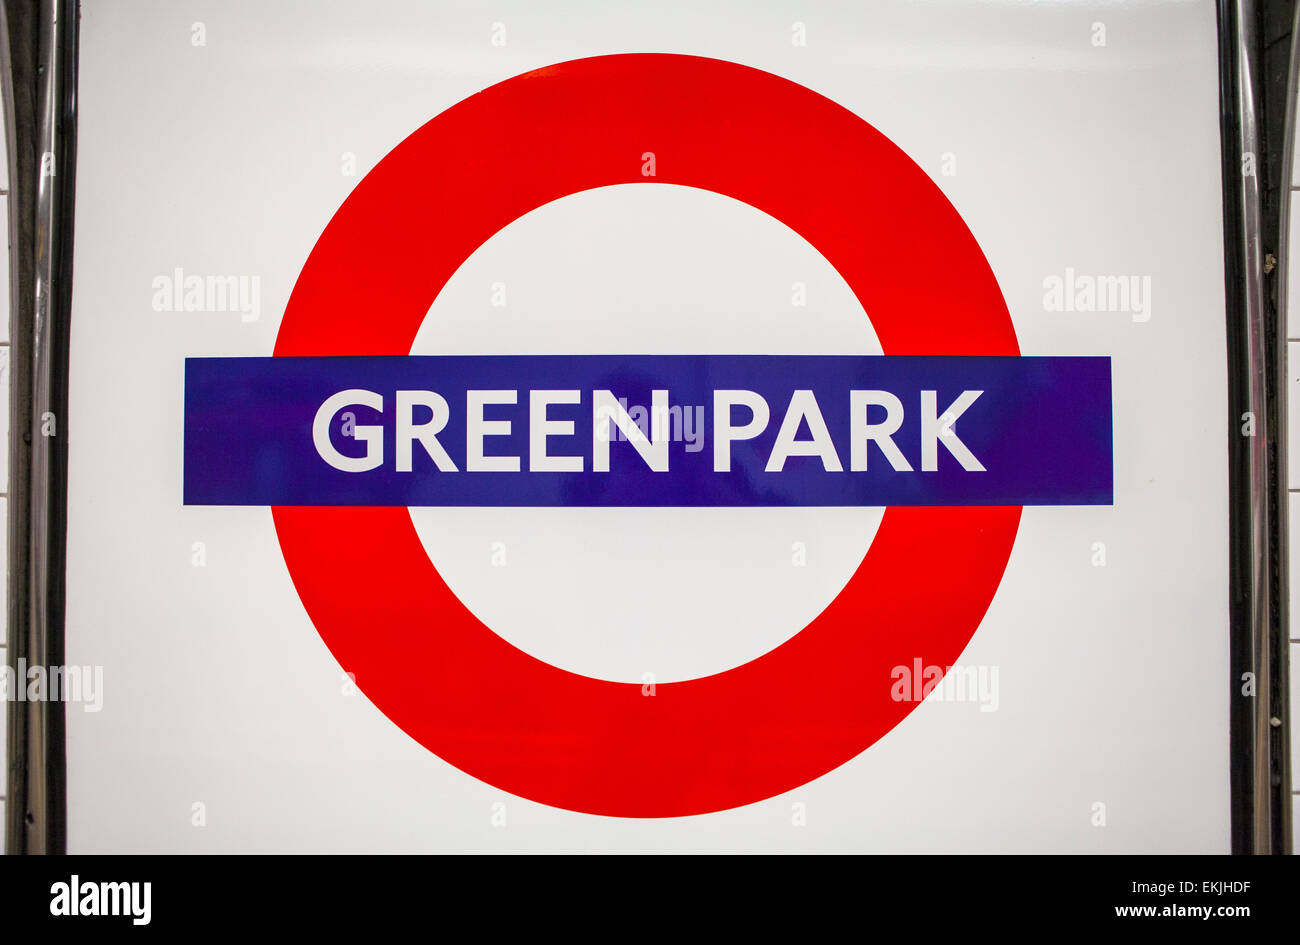 LONDON, UK - APRIL 7TH 2015: A sign for Green Park Underground station in London on 7th April 2014. Stock Photo